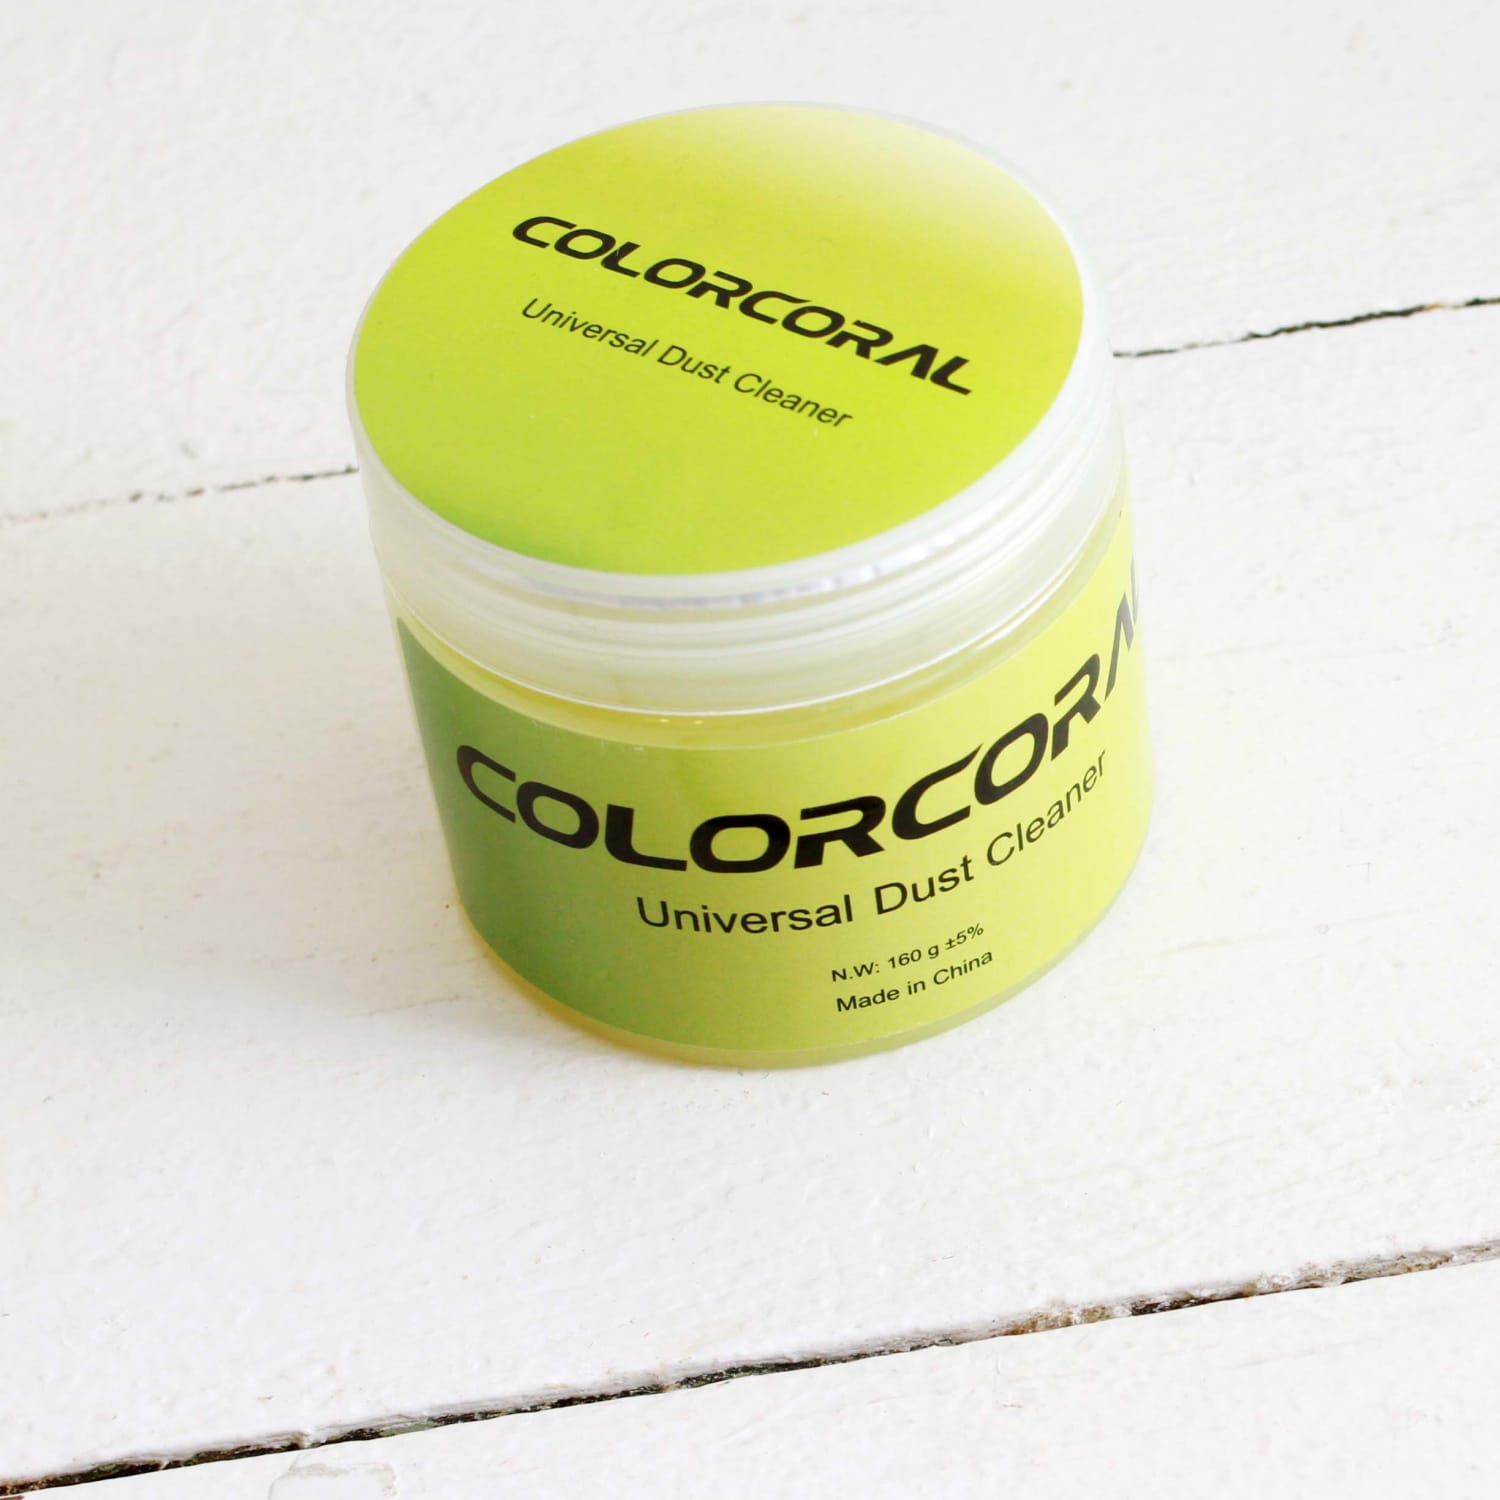 Does the ColorCoral Cleaning Gel Really Work? - Dragon Blogger Technology